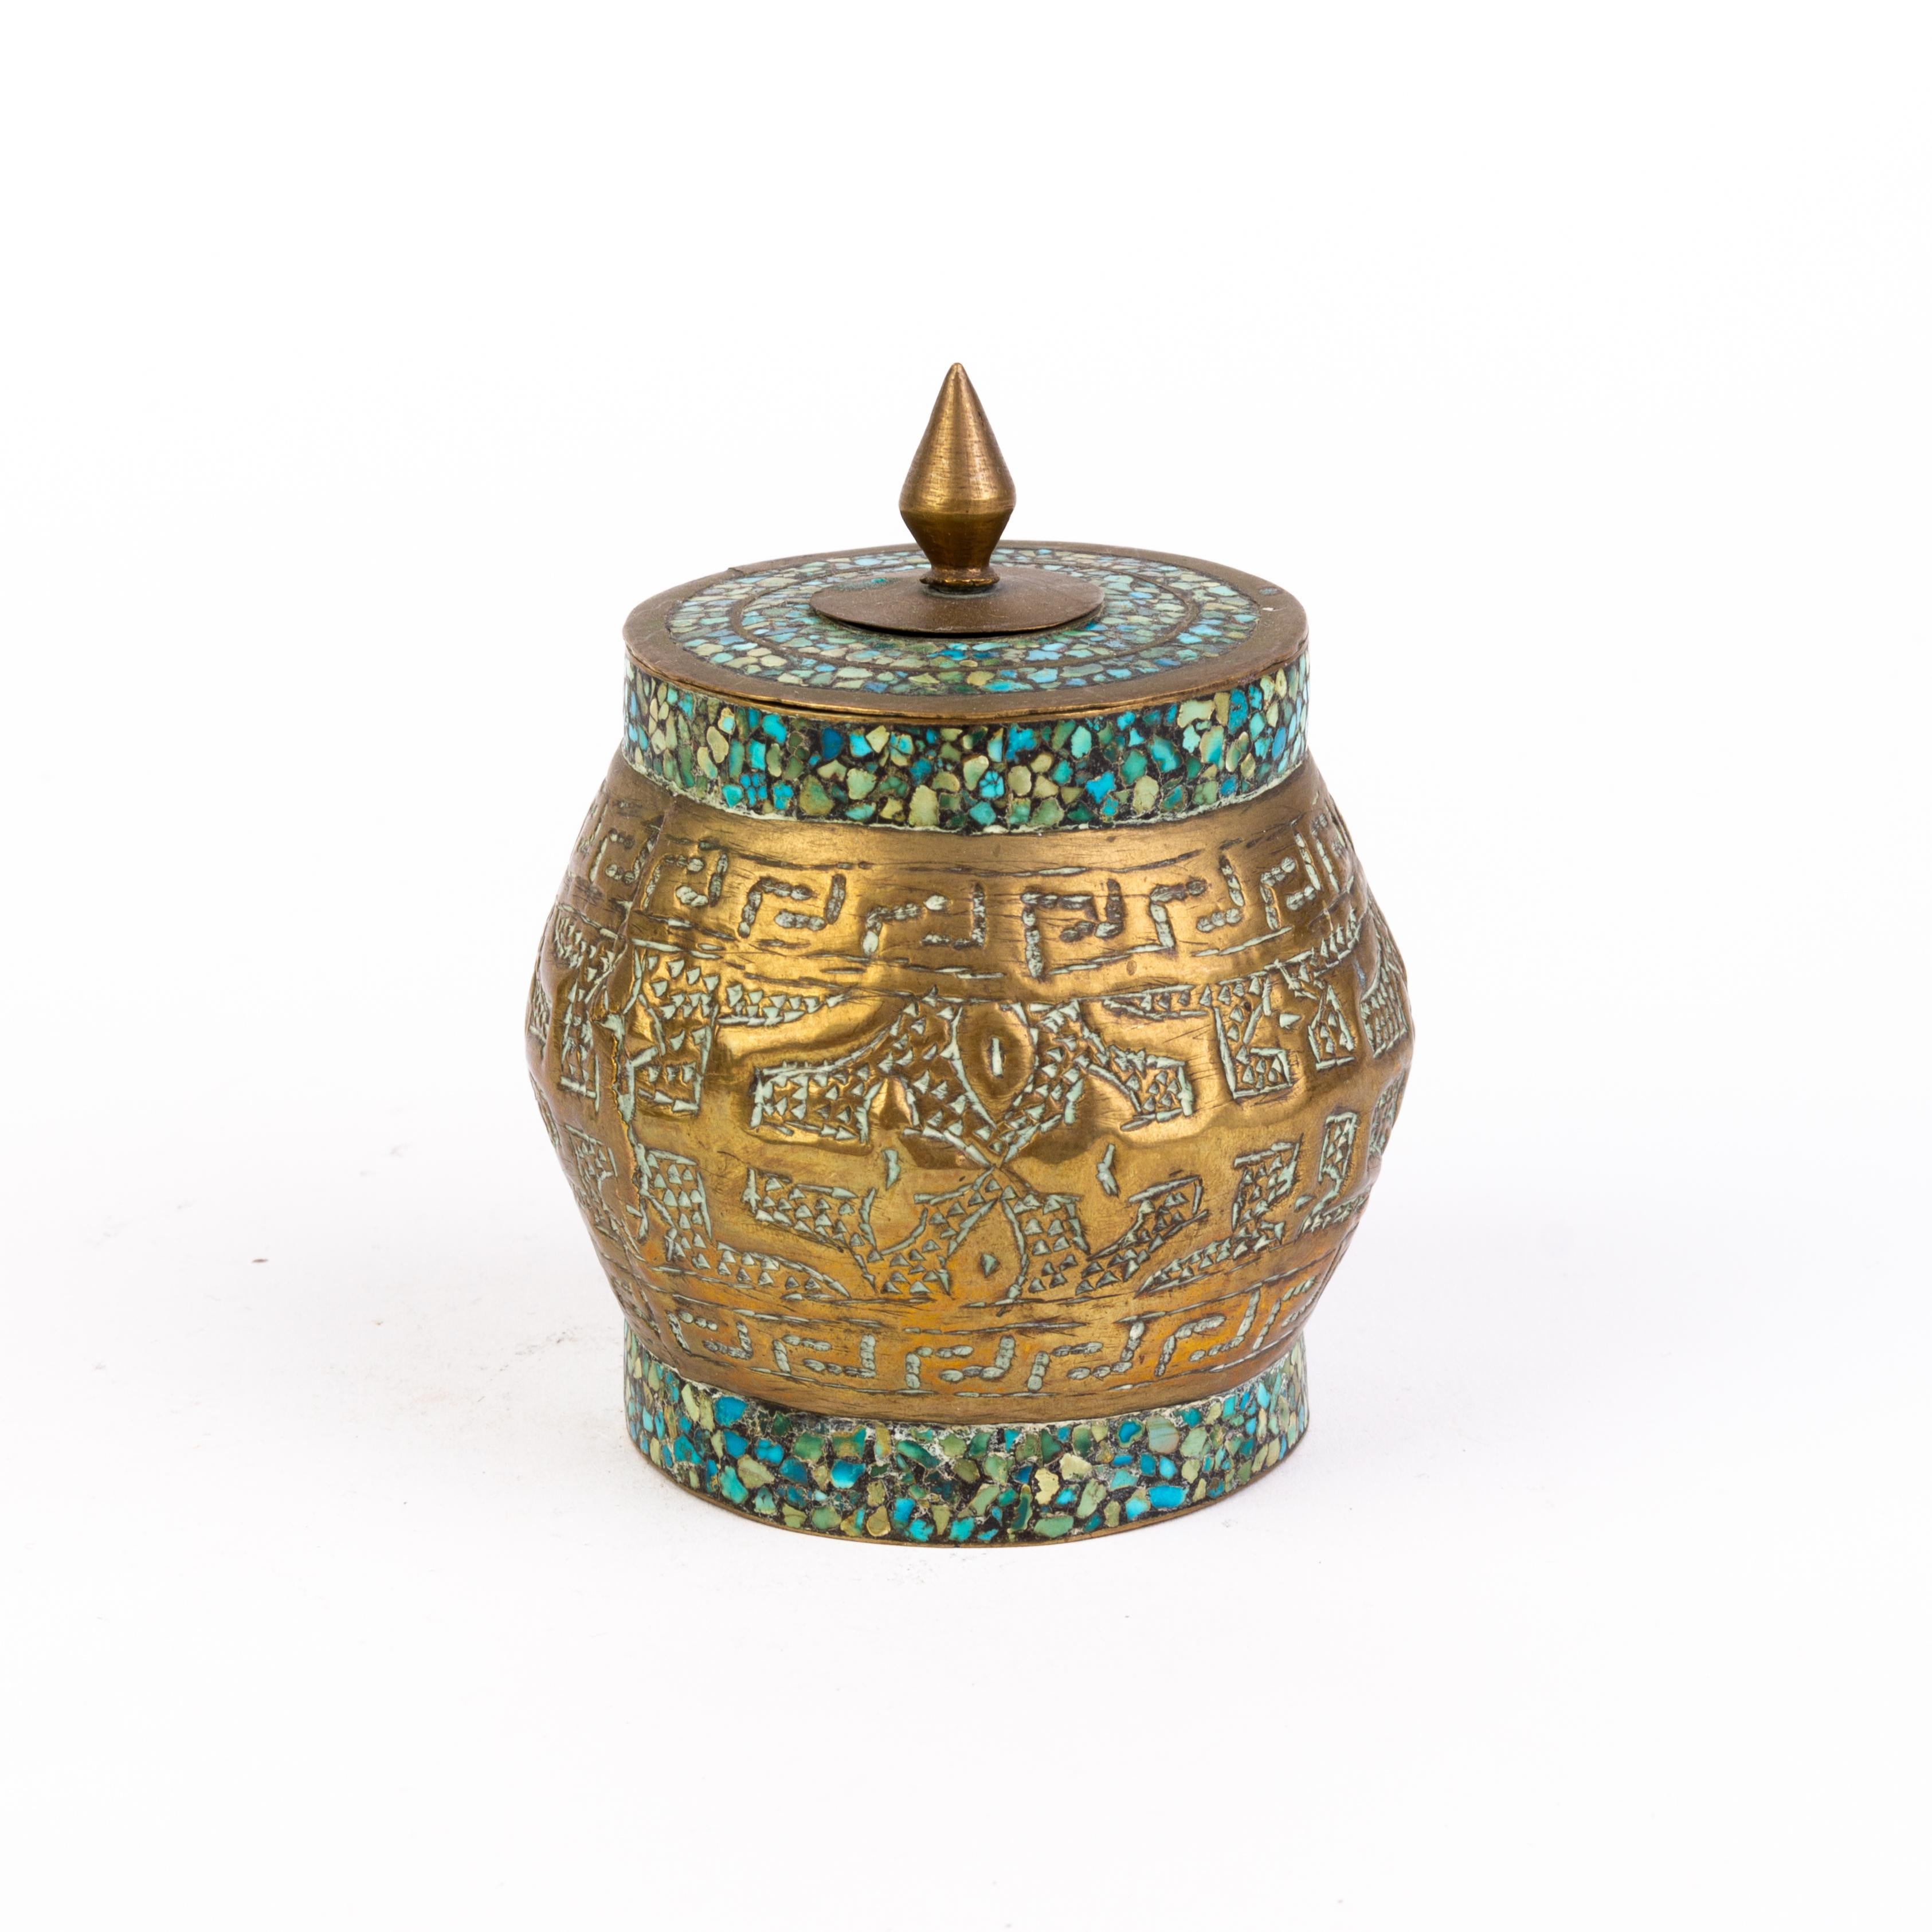 Chinese Tibetan Inlaid Turquoise Mosaic Brass Lidded Jar 19th Century  For Sale 1